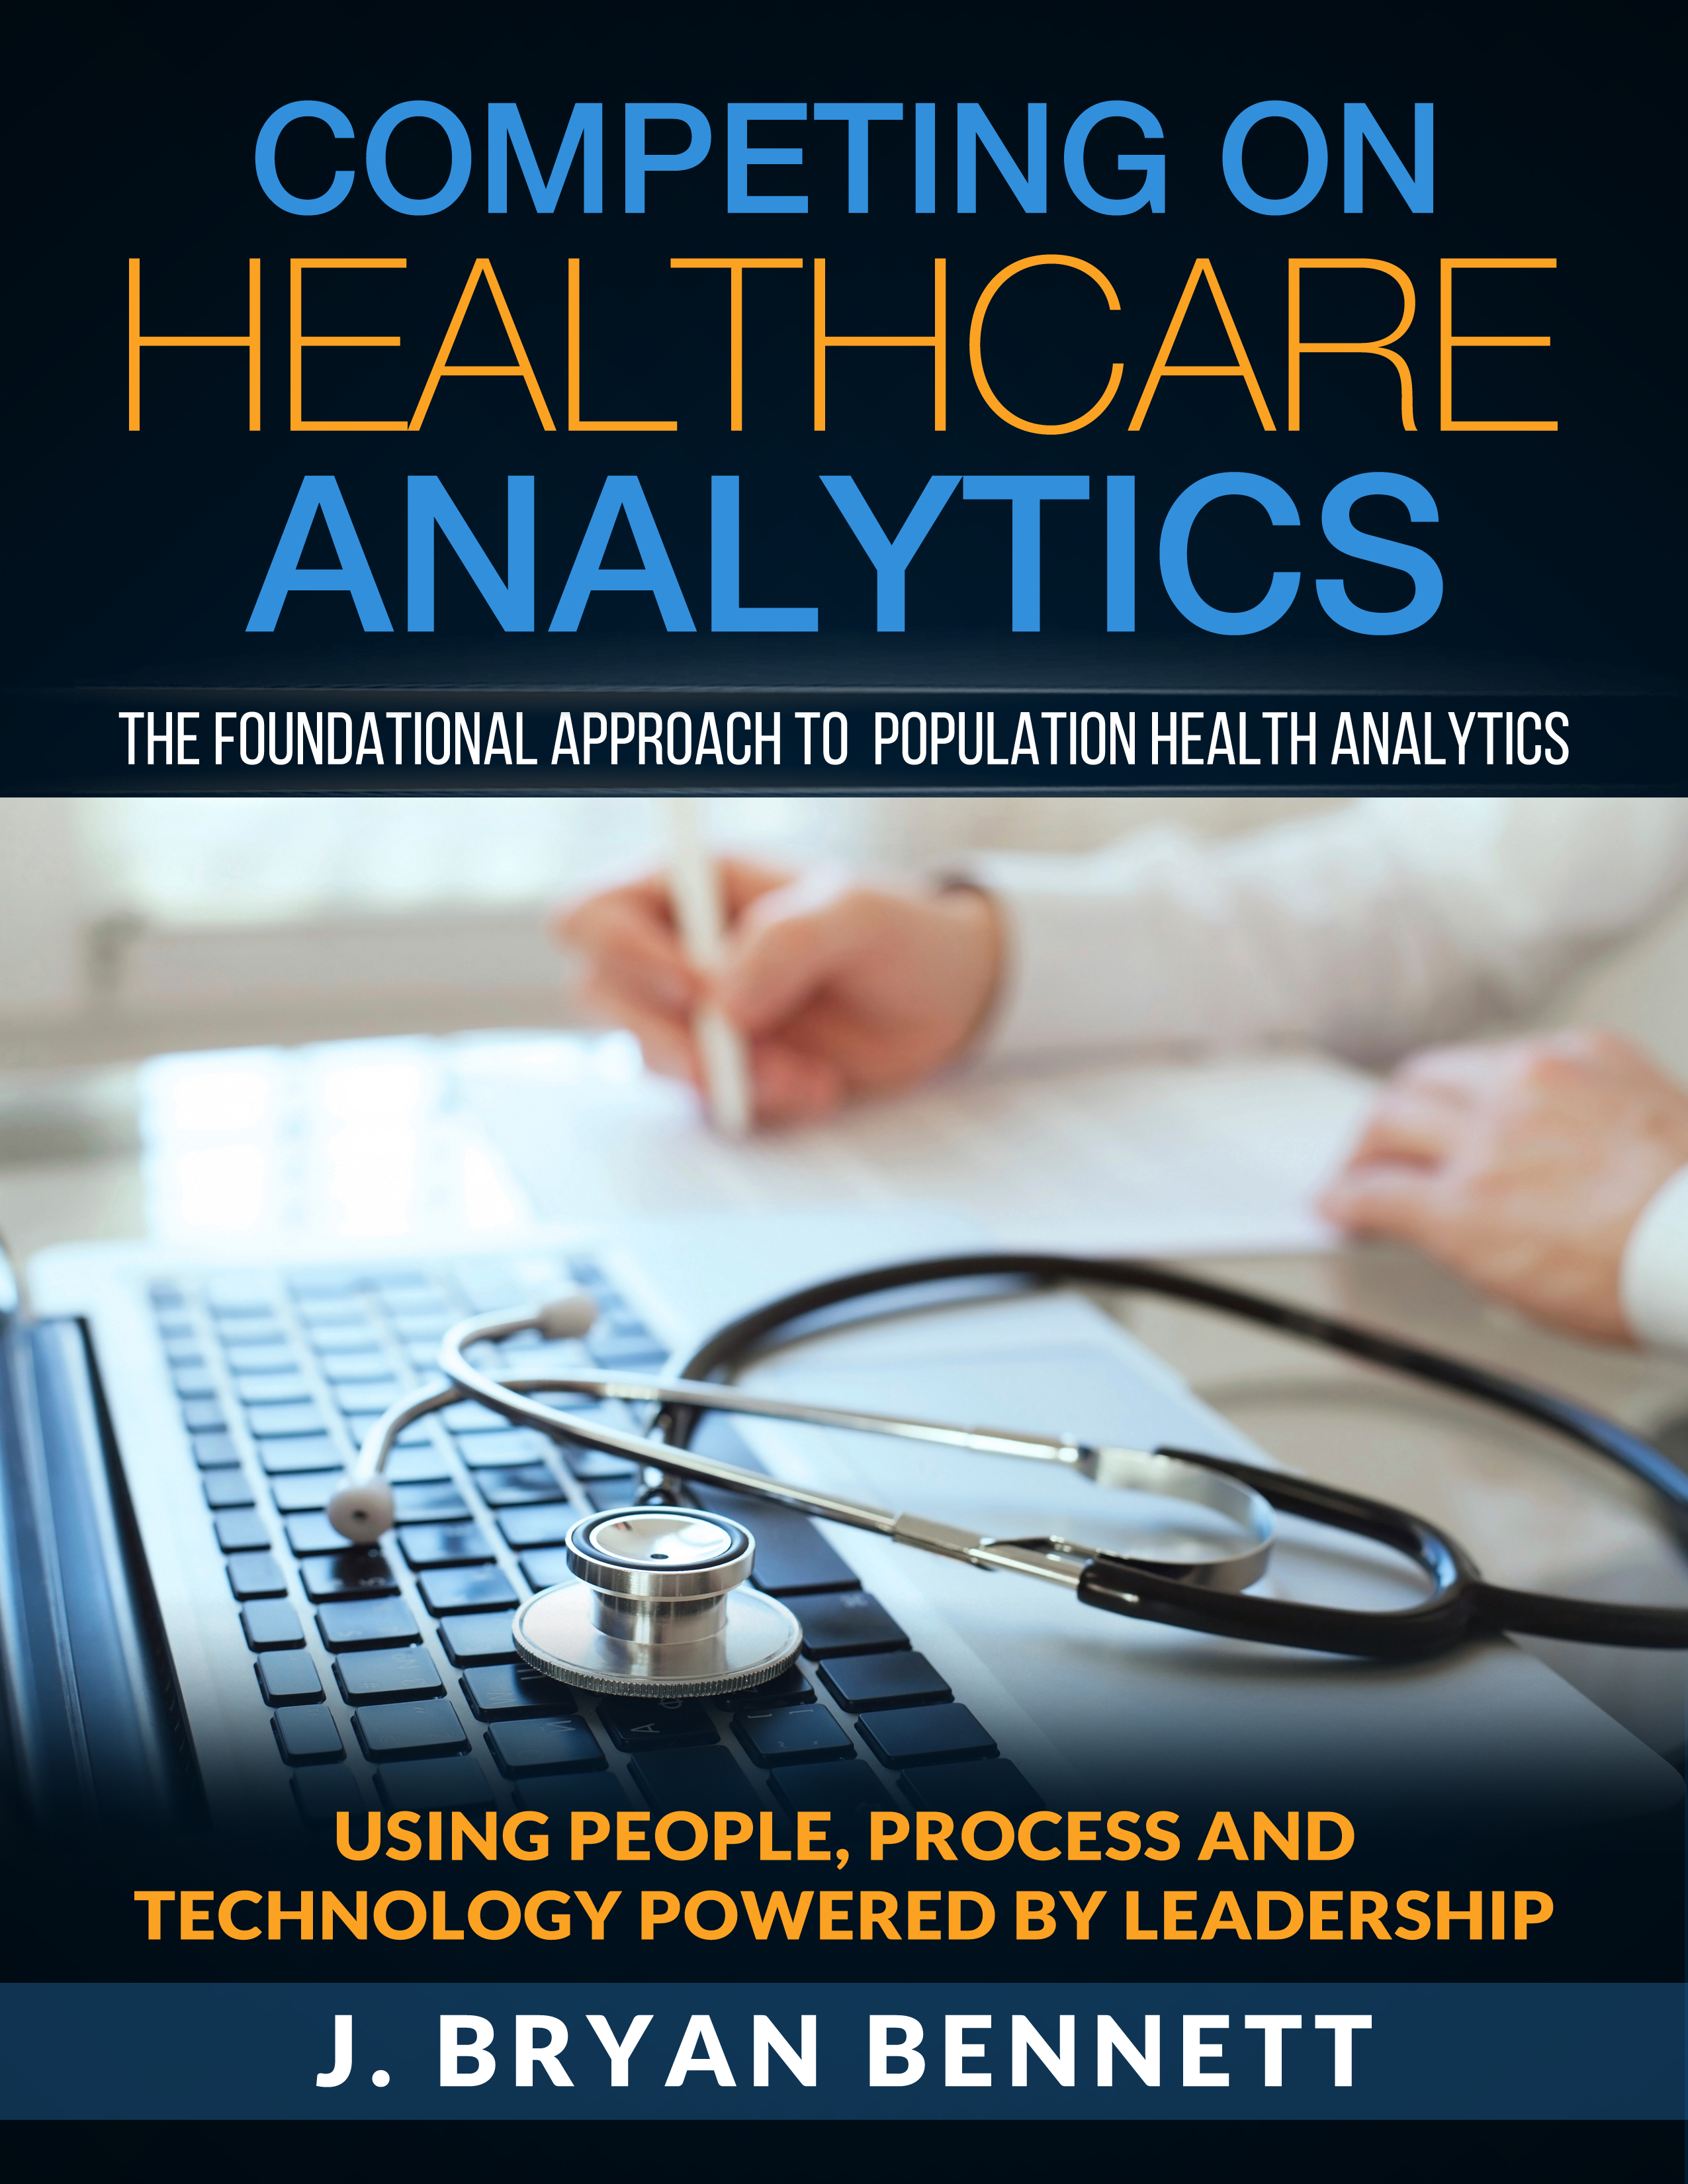 Competing on Healthcare Analytics Book Pre-Order, U.S. Shipping